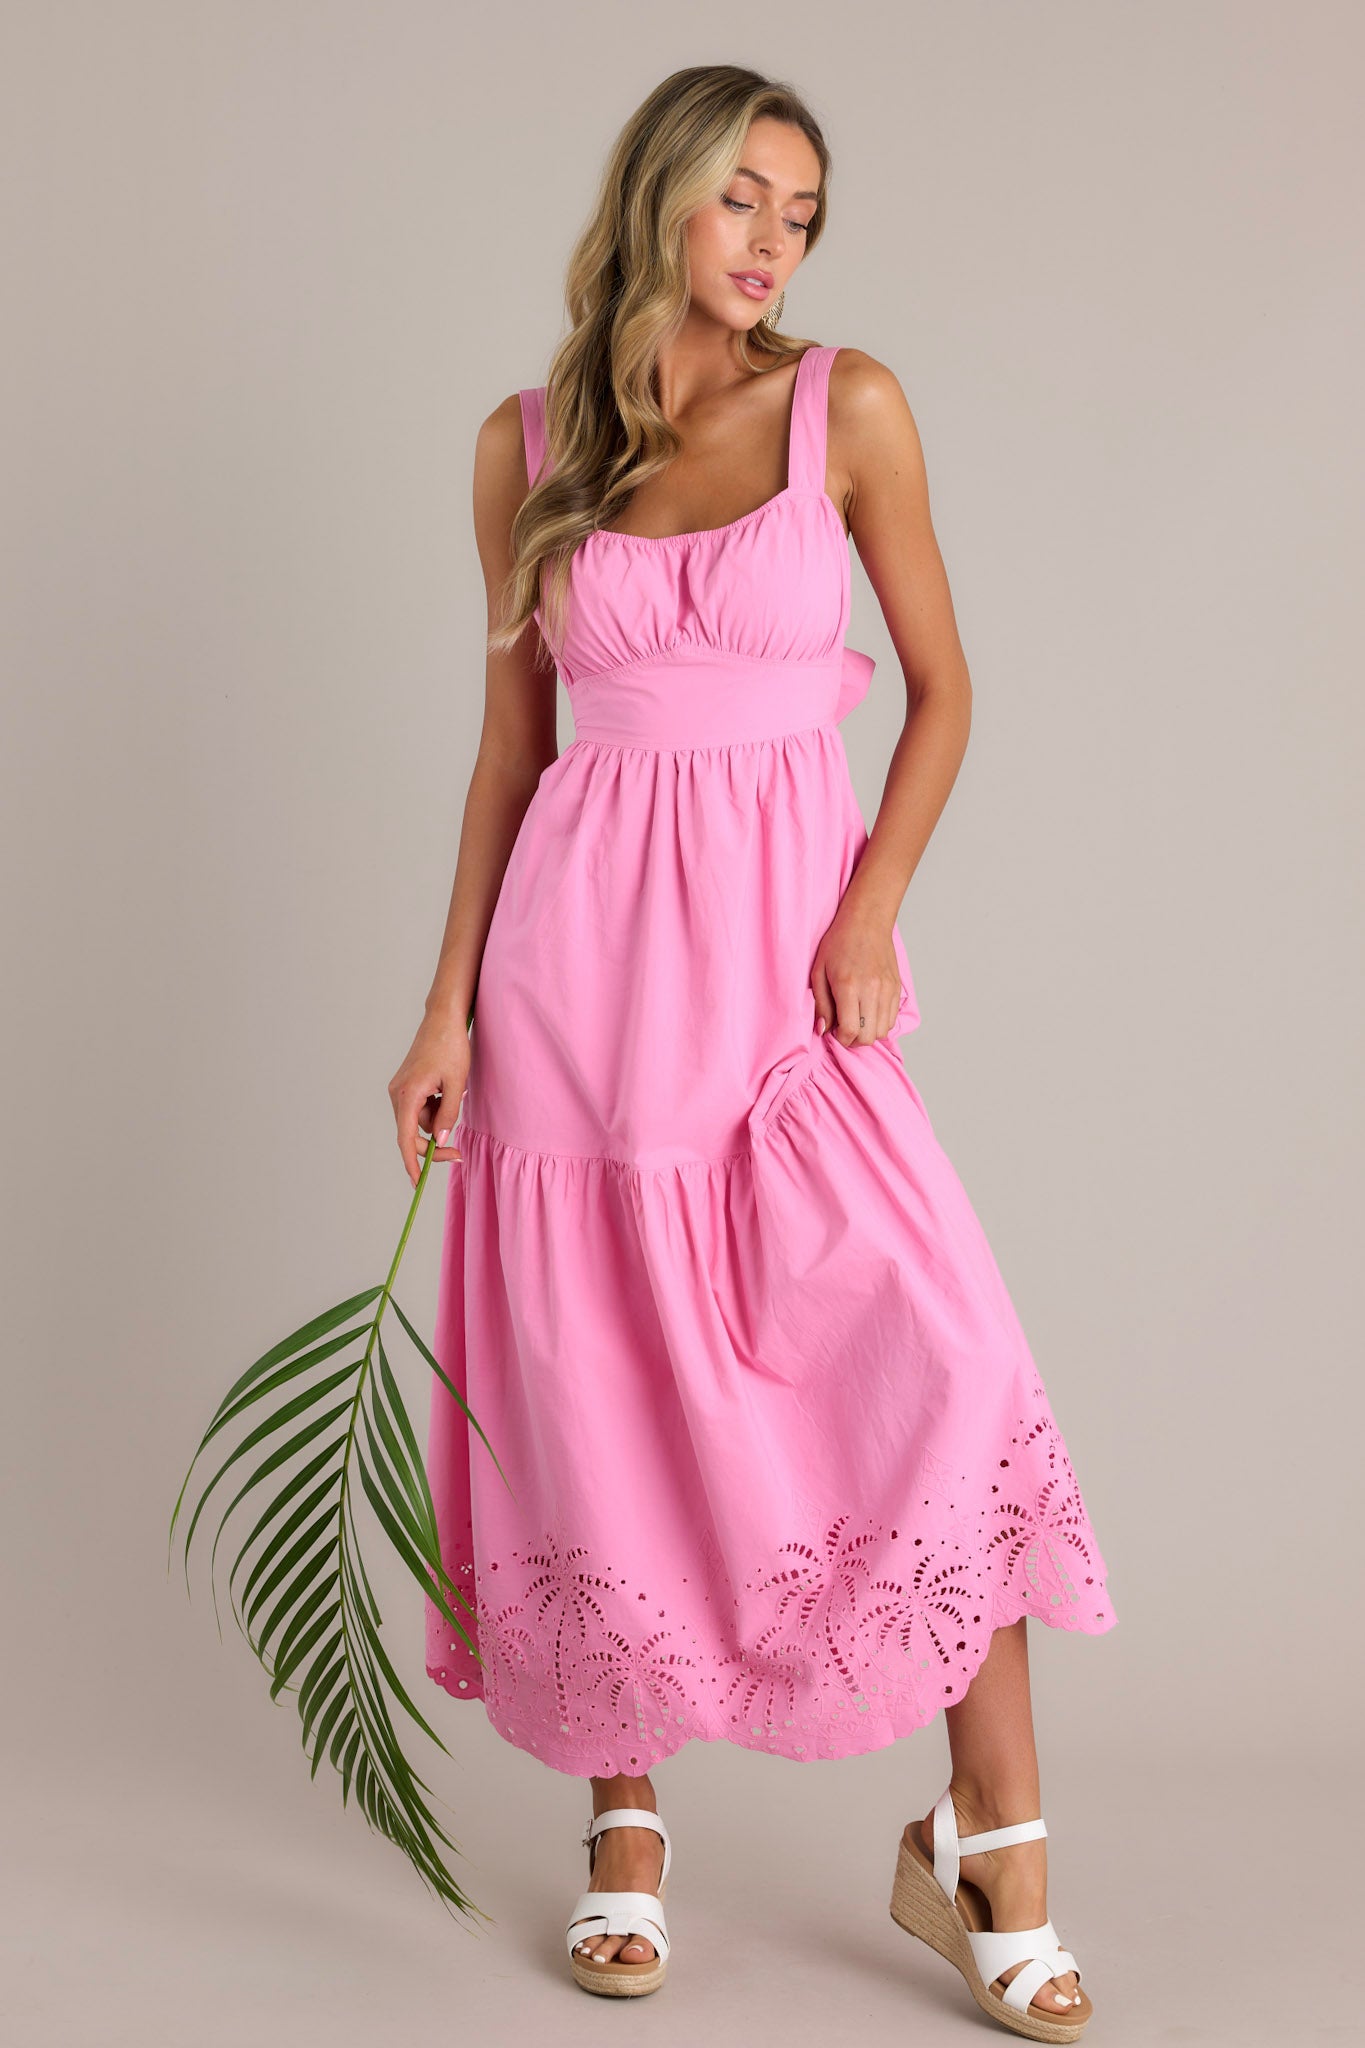 This pink midi dress features an elastic square neckline, thick adjustable straps, a thick waistband with a self-tie back feature, an open lower back, a single tier, palm eyelet detailing, and a scalloped hemline.